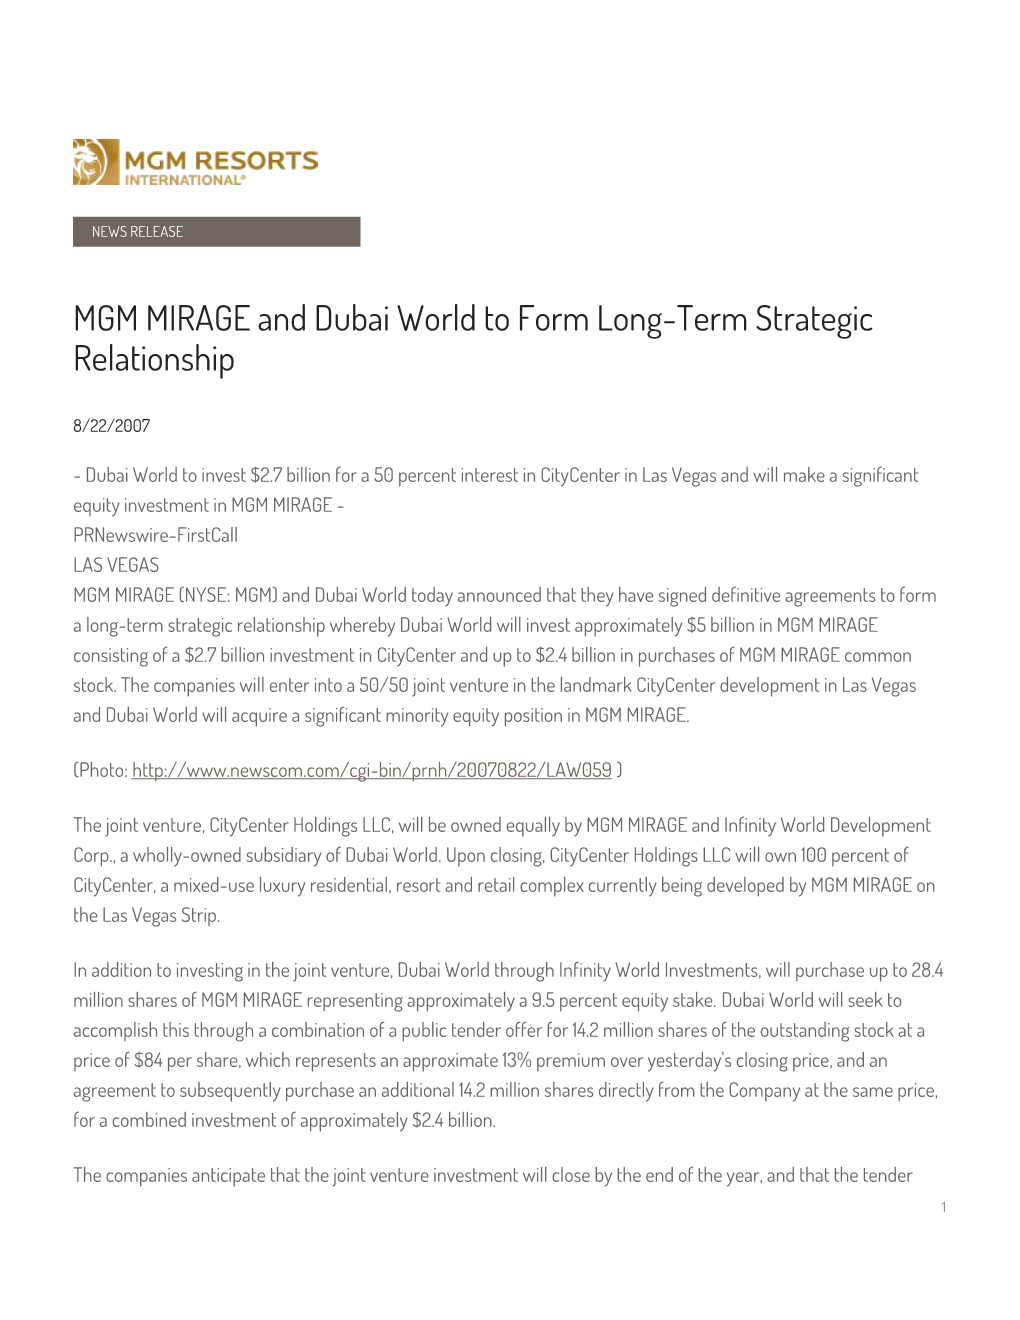 MGM MIRAGE and Dubai World to Form Long-Term Strategic Relationship